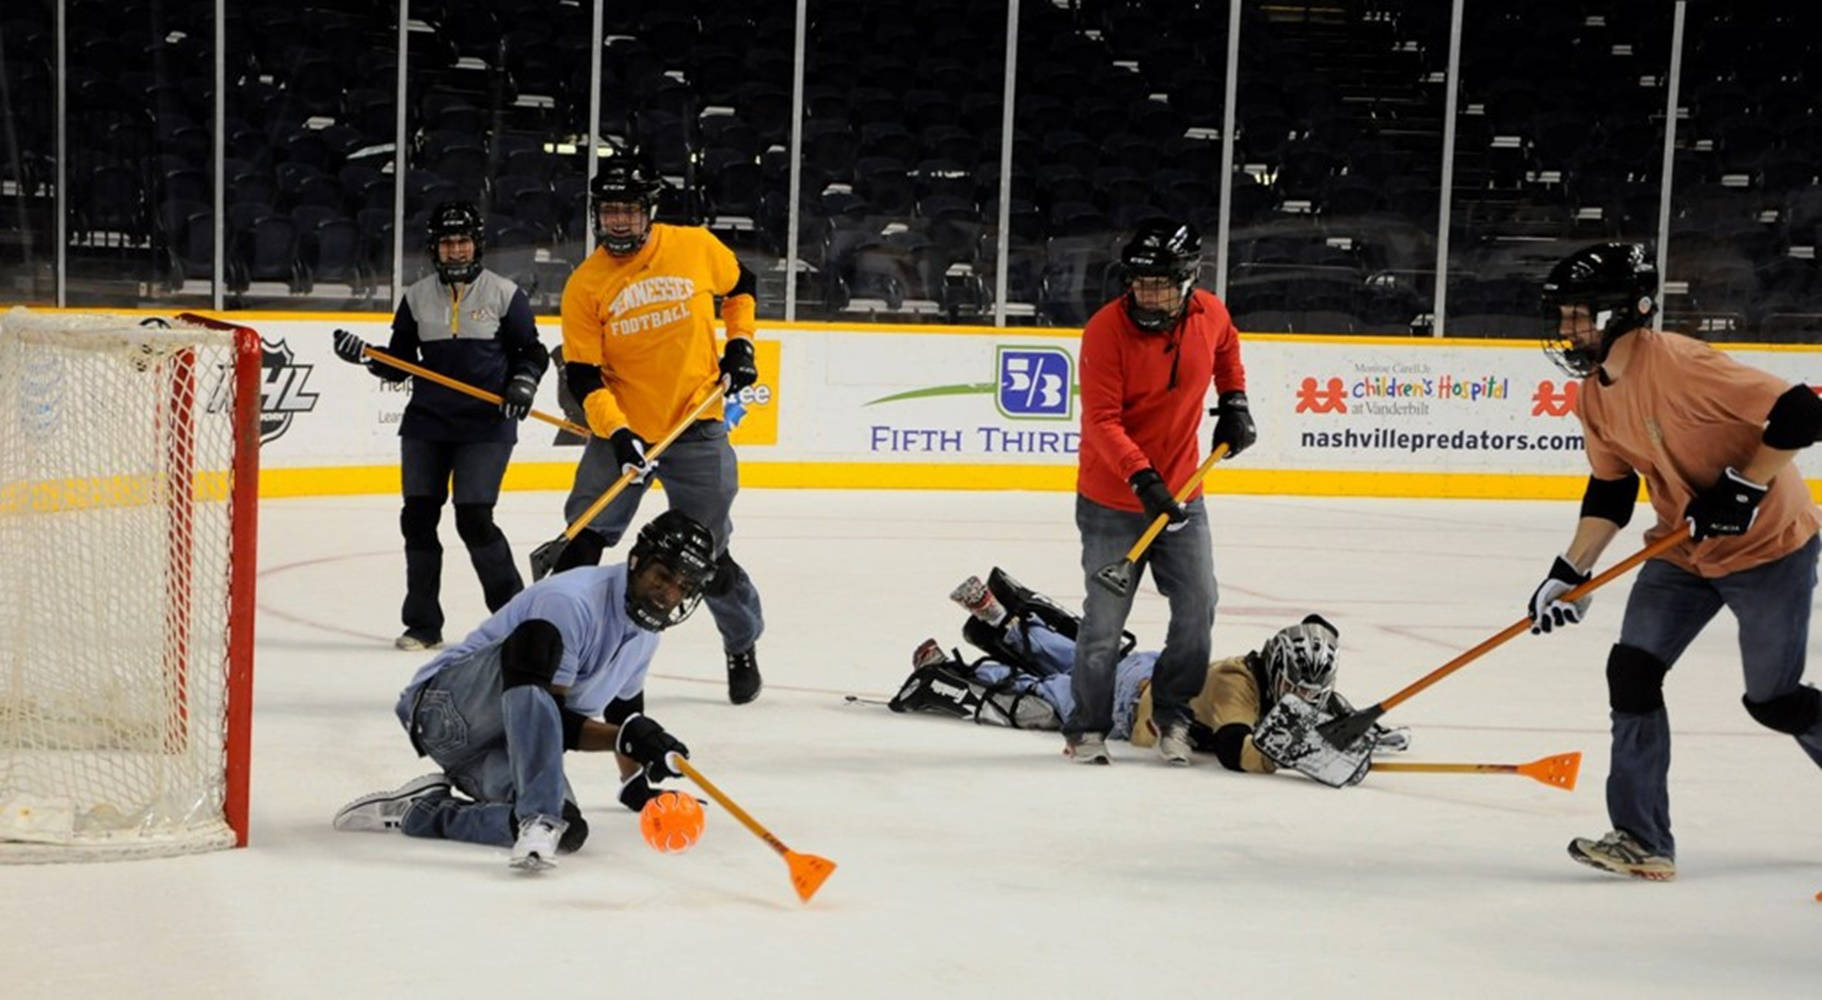 Competitive Broomball Team in Action Wallpaper